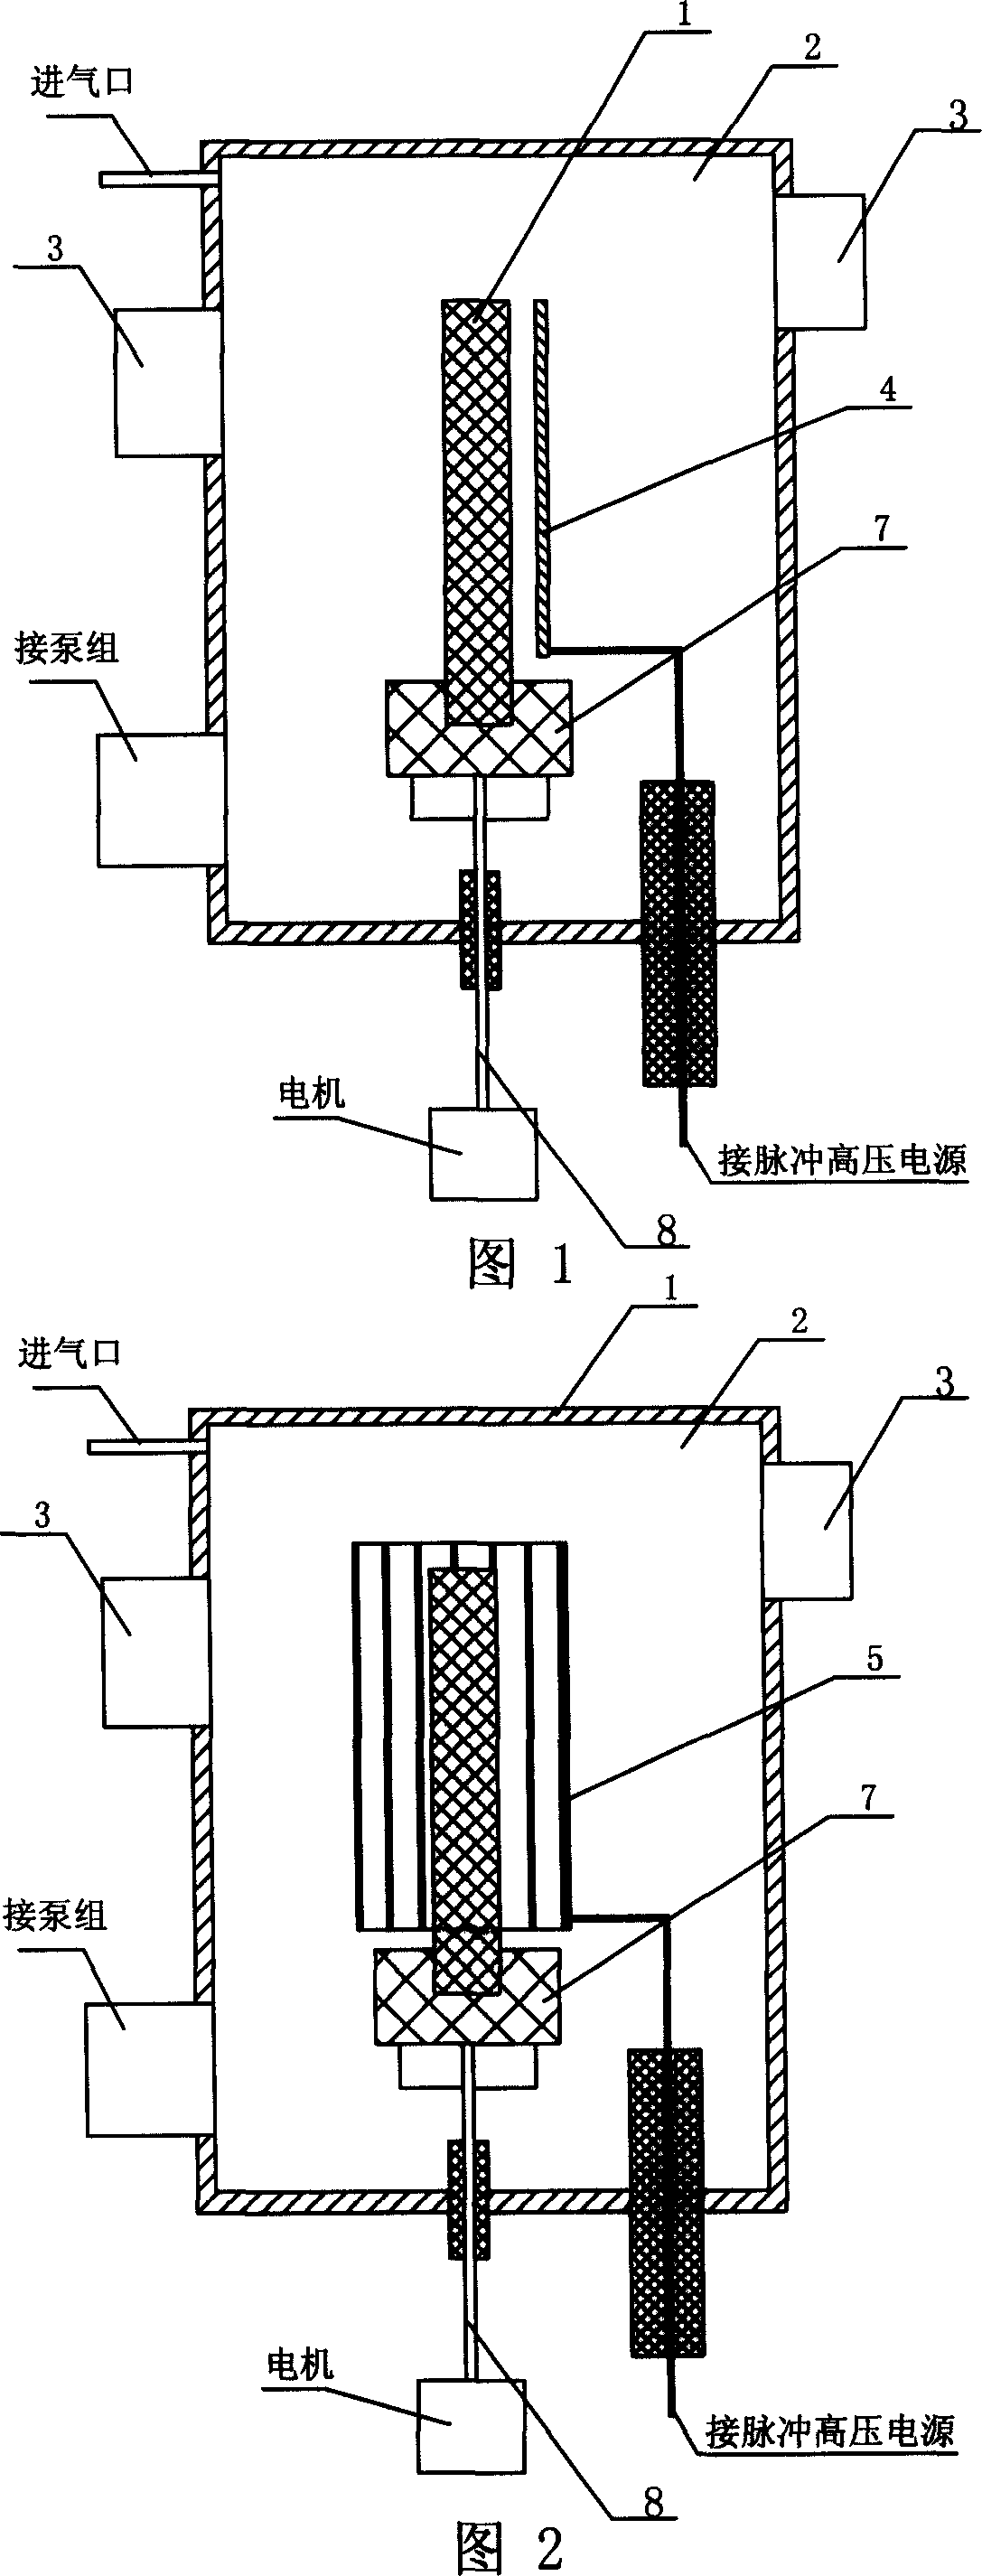 Plasma injection method and apparatus for insulation material spare parts